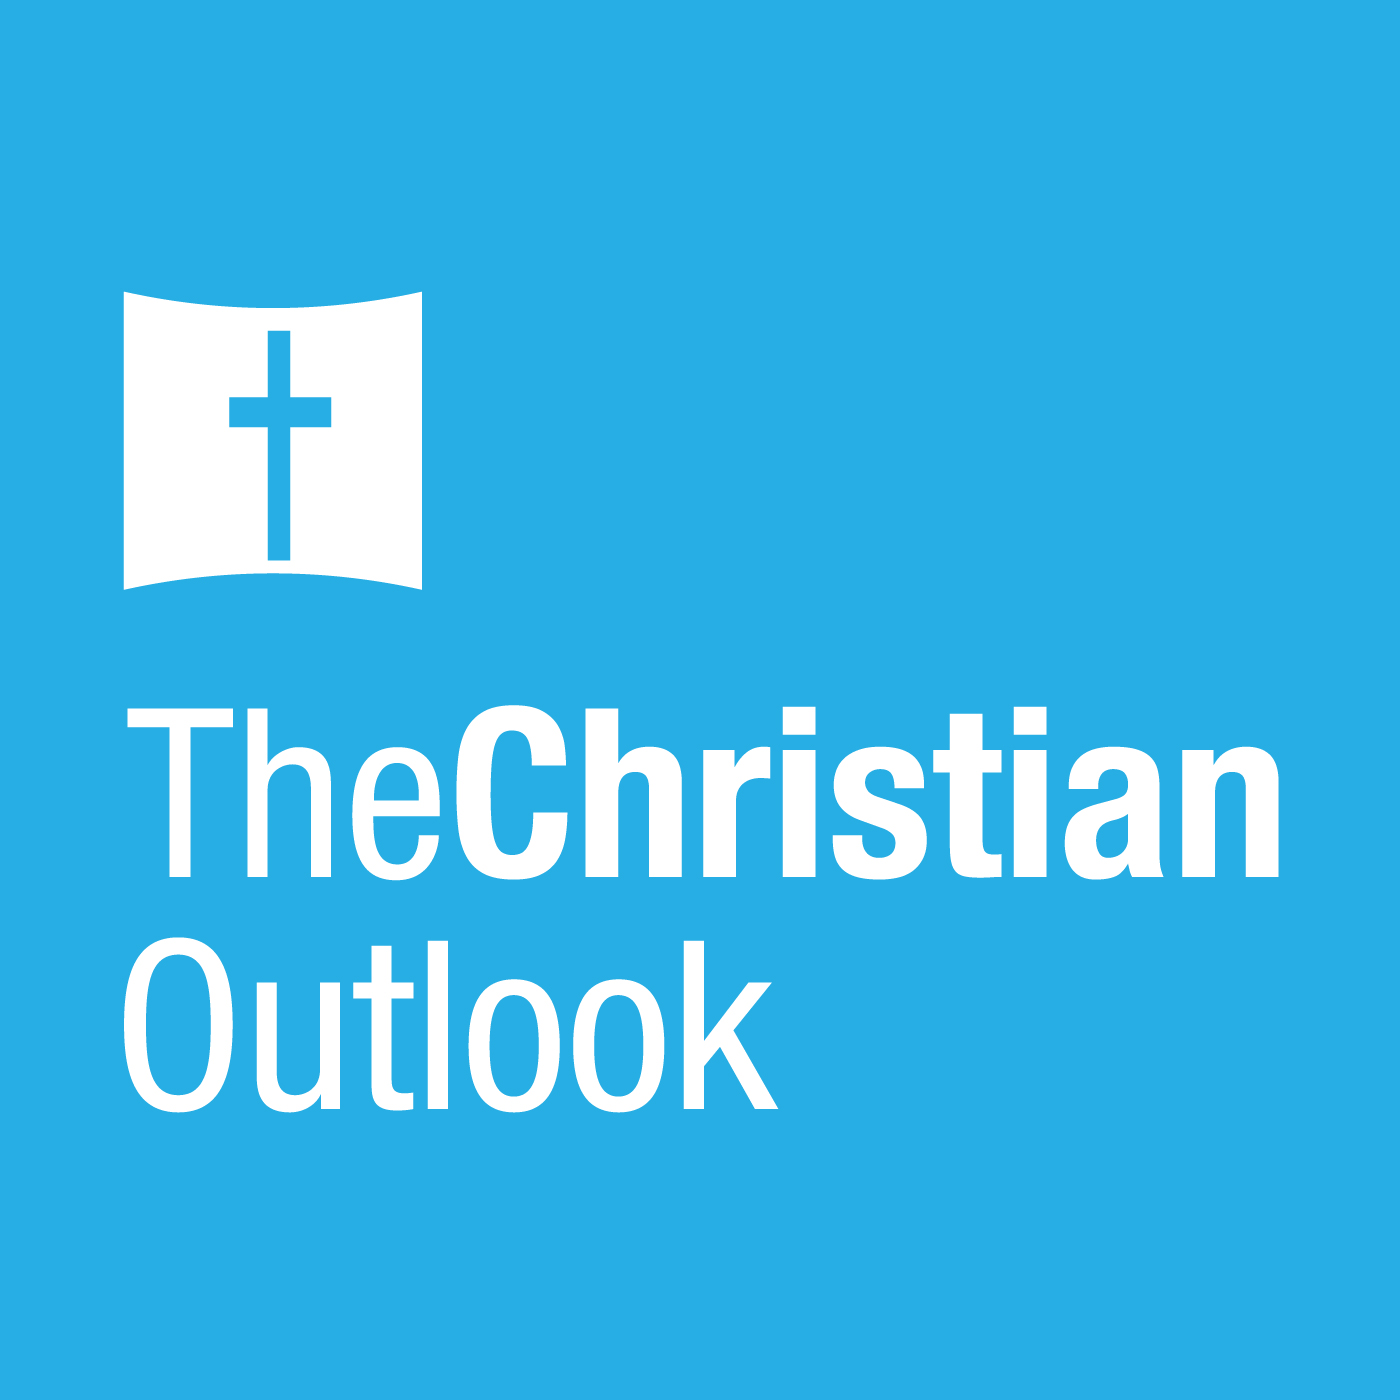 TCO 4/19/14: R.C. Sproul and Albert Mohler on Easter